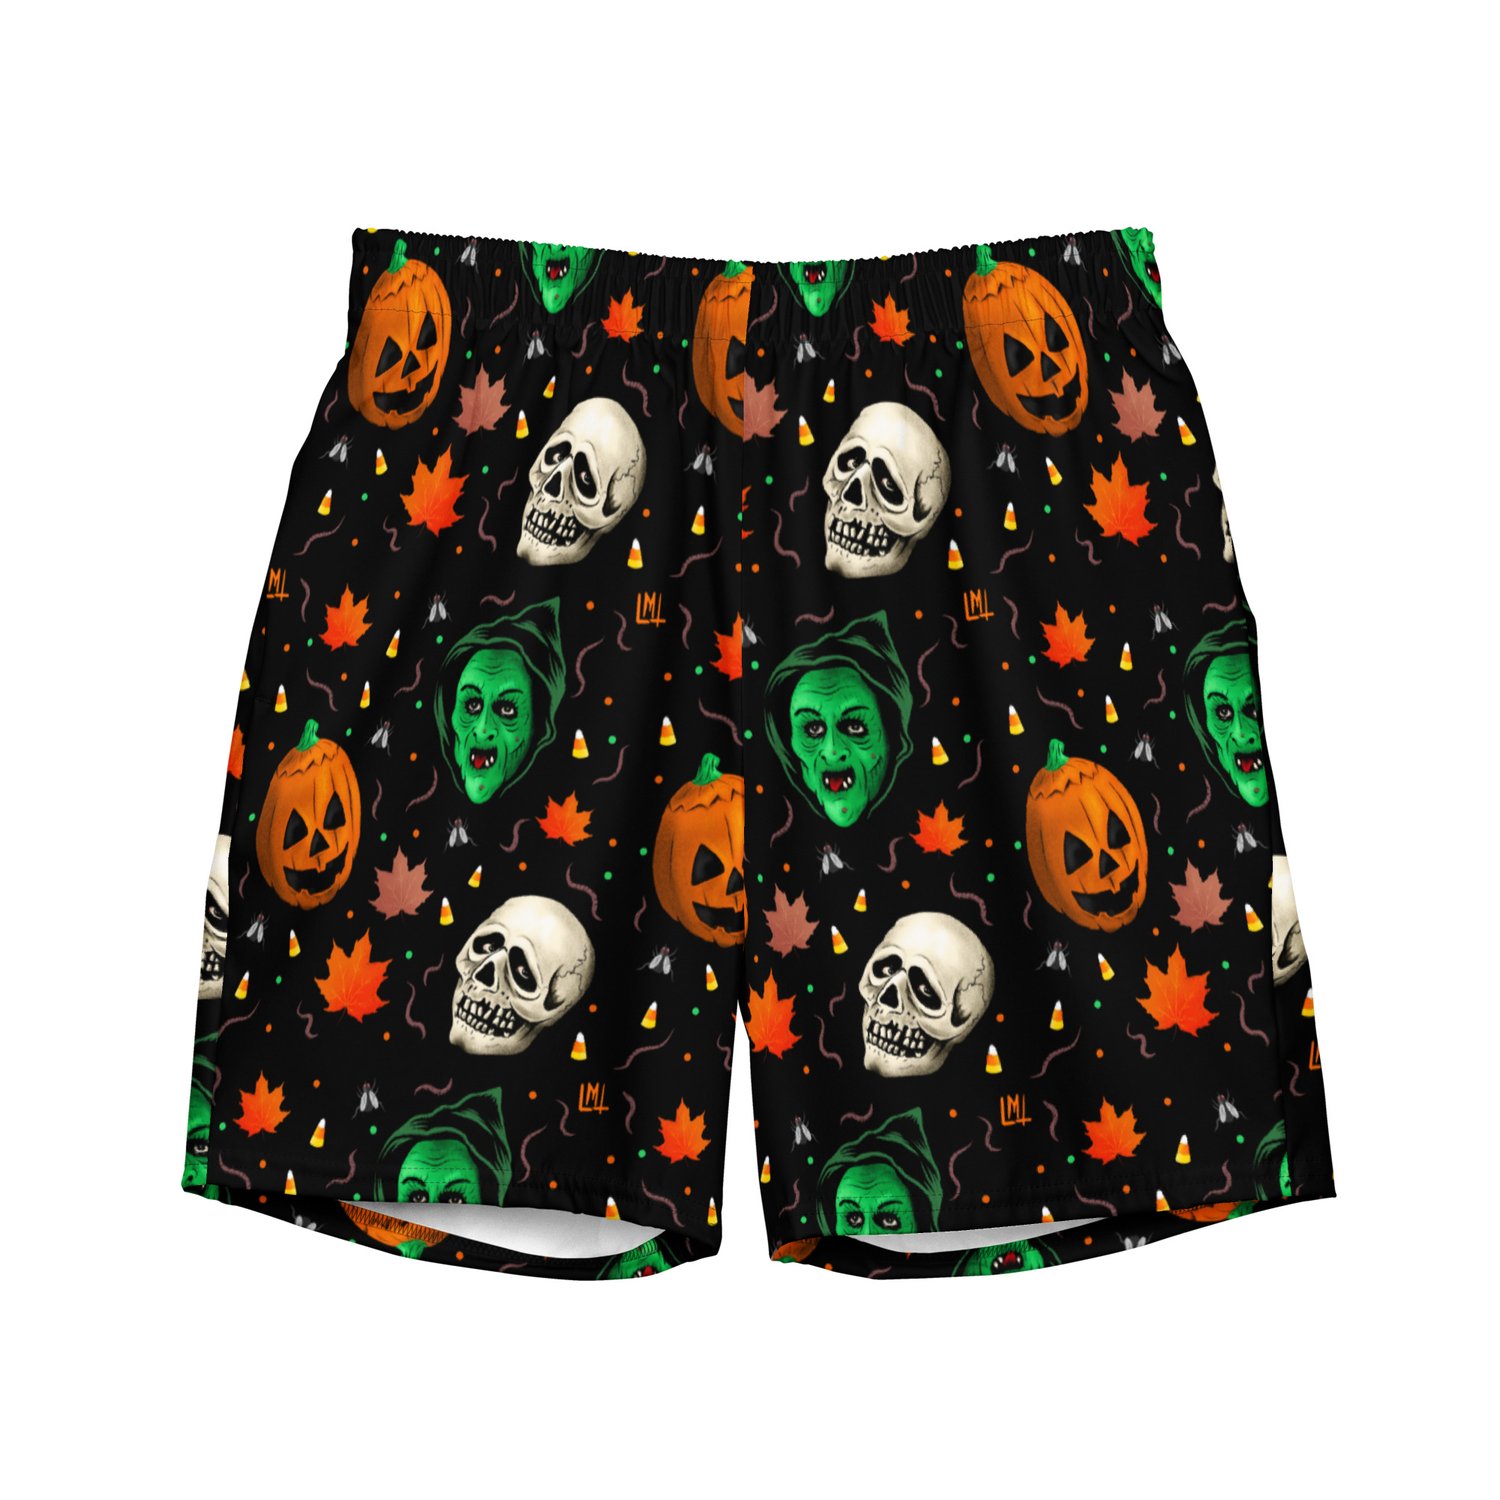 Image of Season of the Witch men's swim trunks